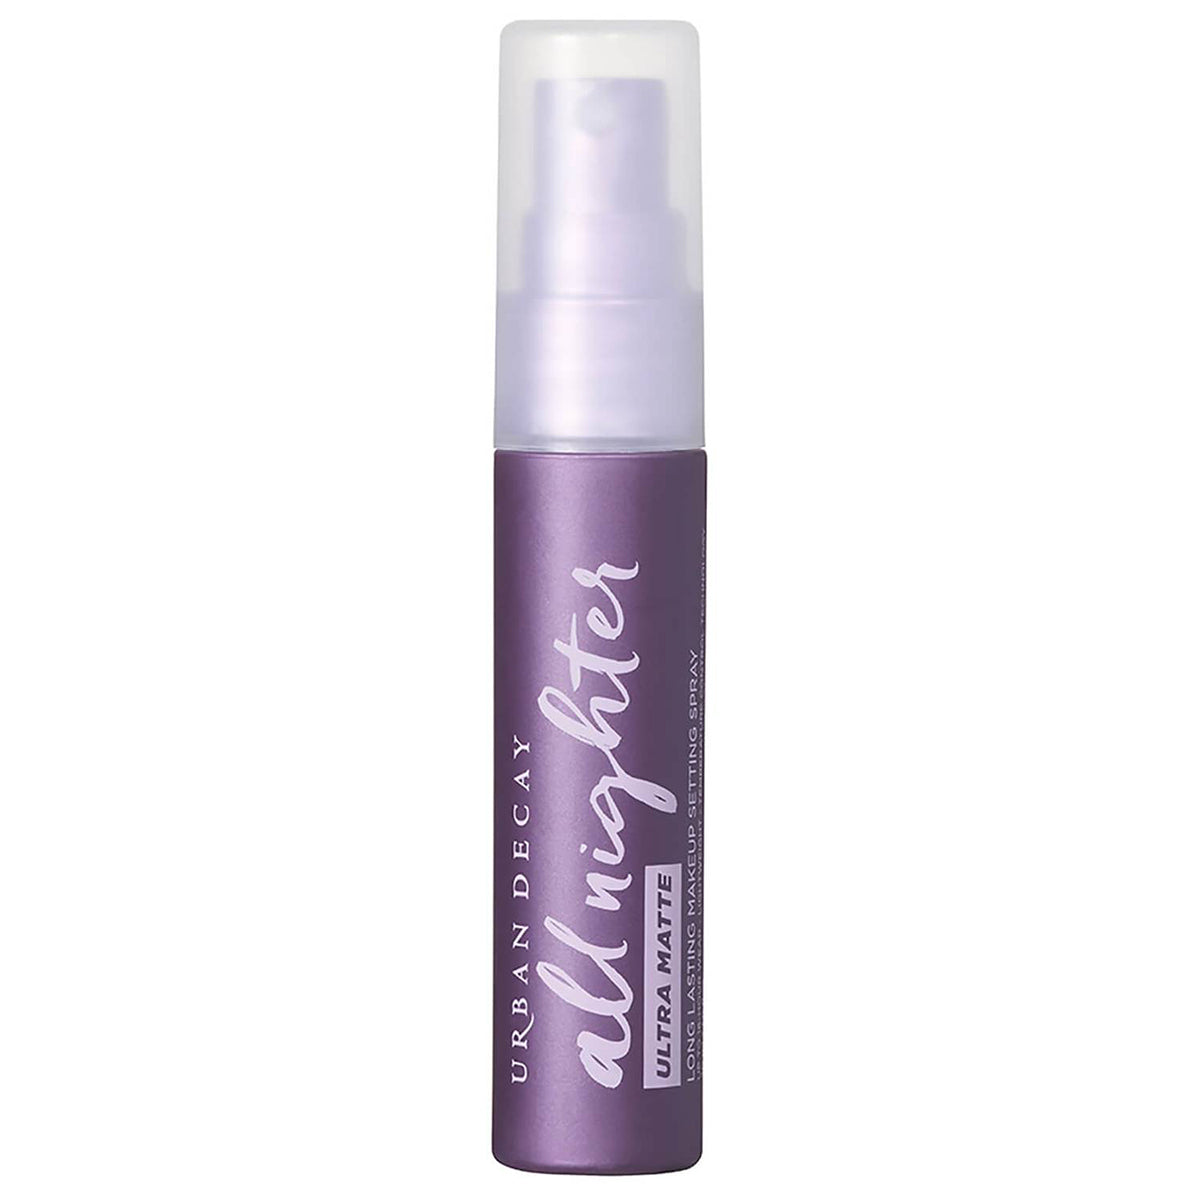 Urban Decay All Nighter Setting Spray Ultra Matte Travel Size